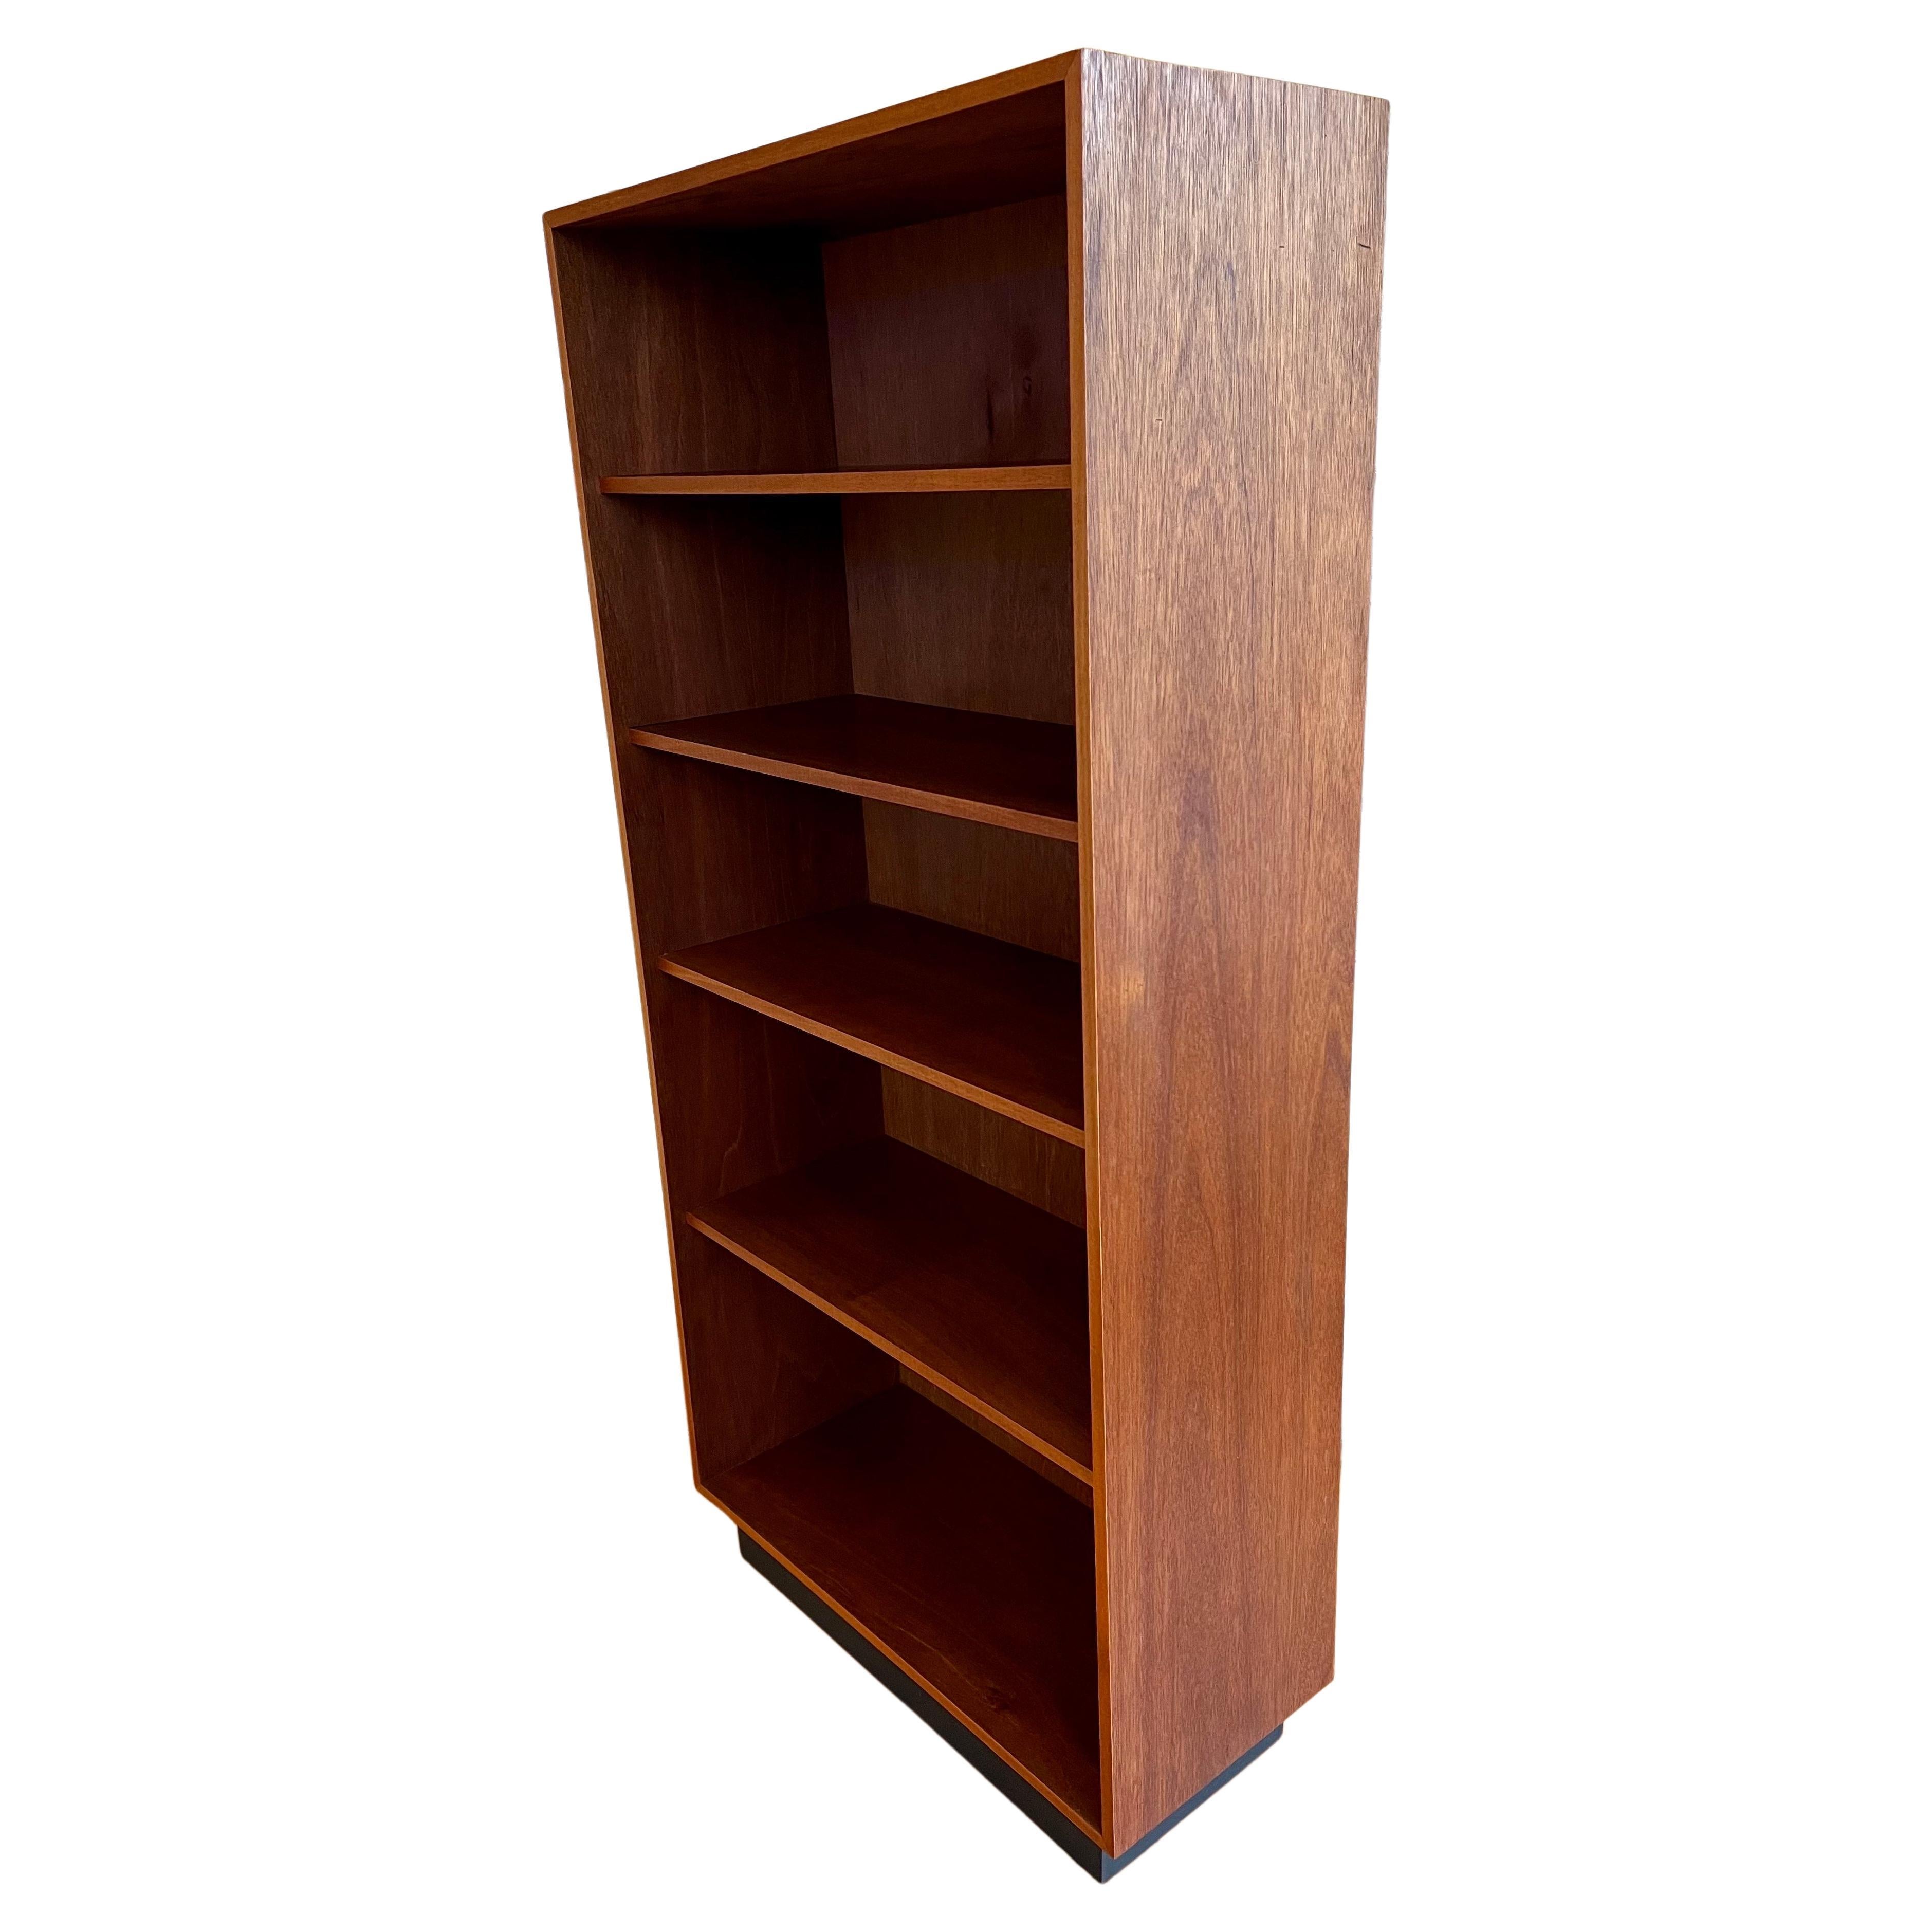 Beautiful nice solid custom-made walnut bookcase, with a black lacquer floating base and shelves, great woodworking piece, in excellent condition. the shelves are not removable and the bottom shelf has a 15